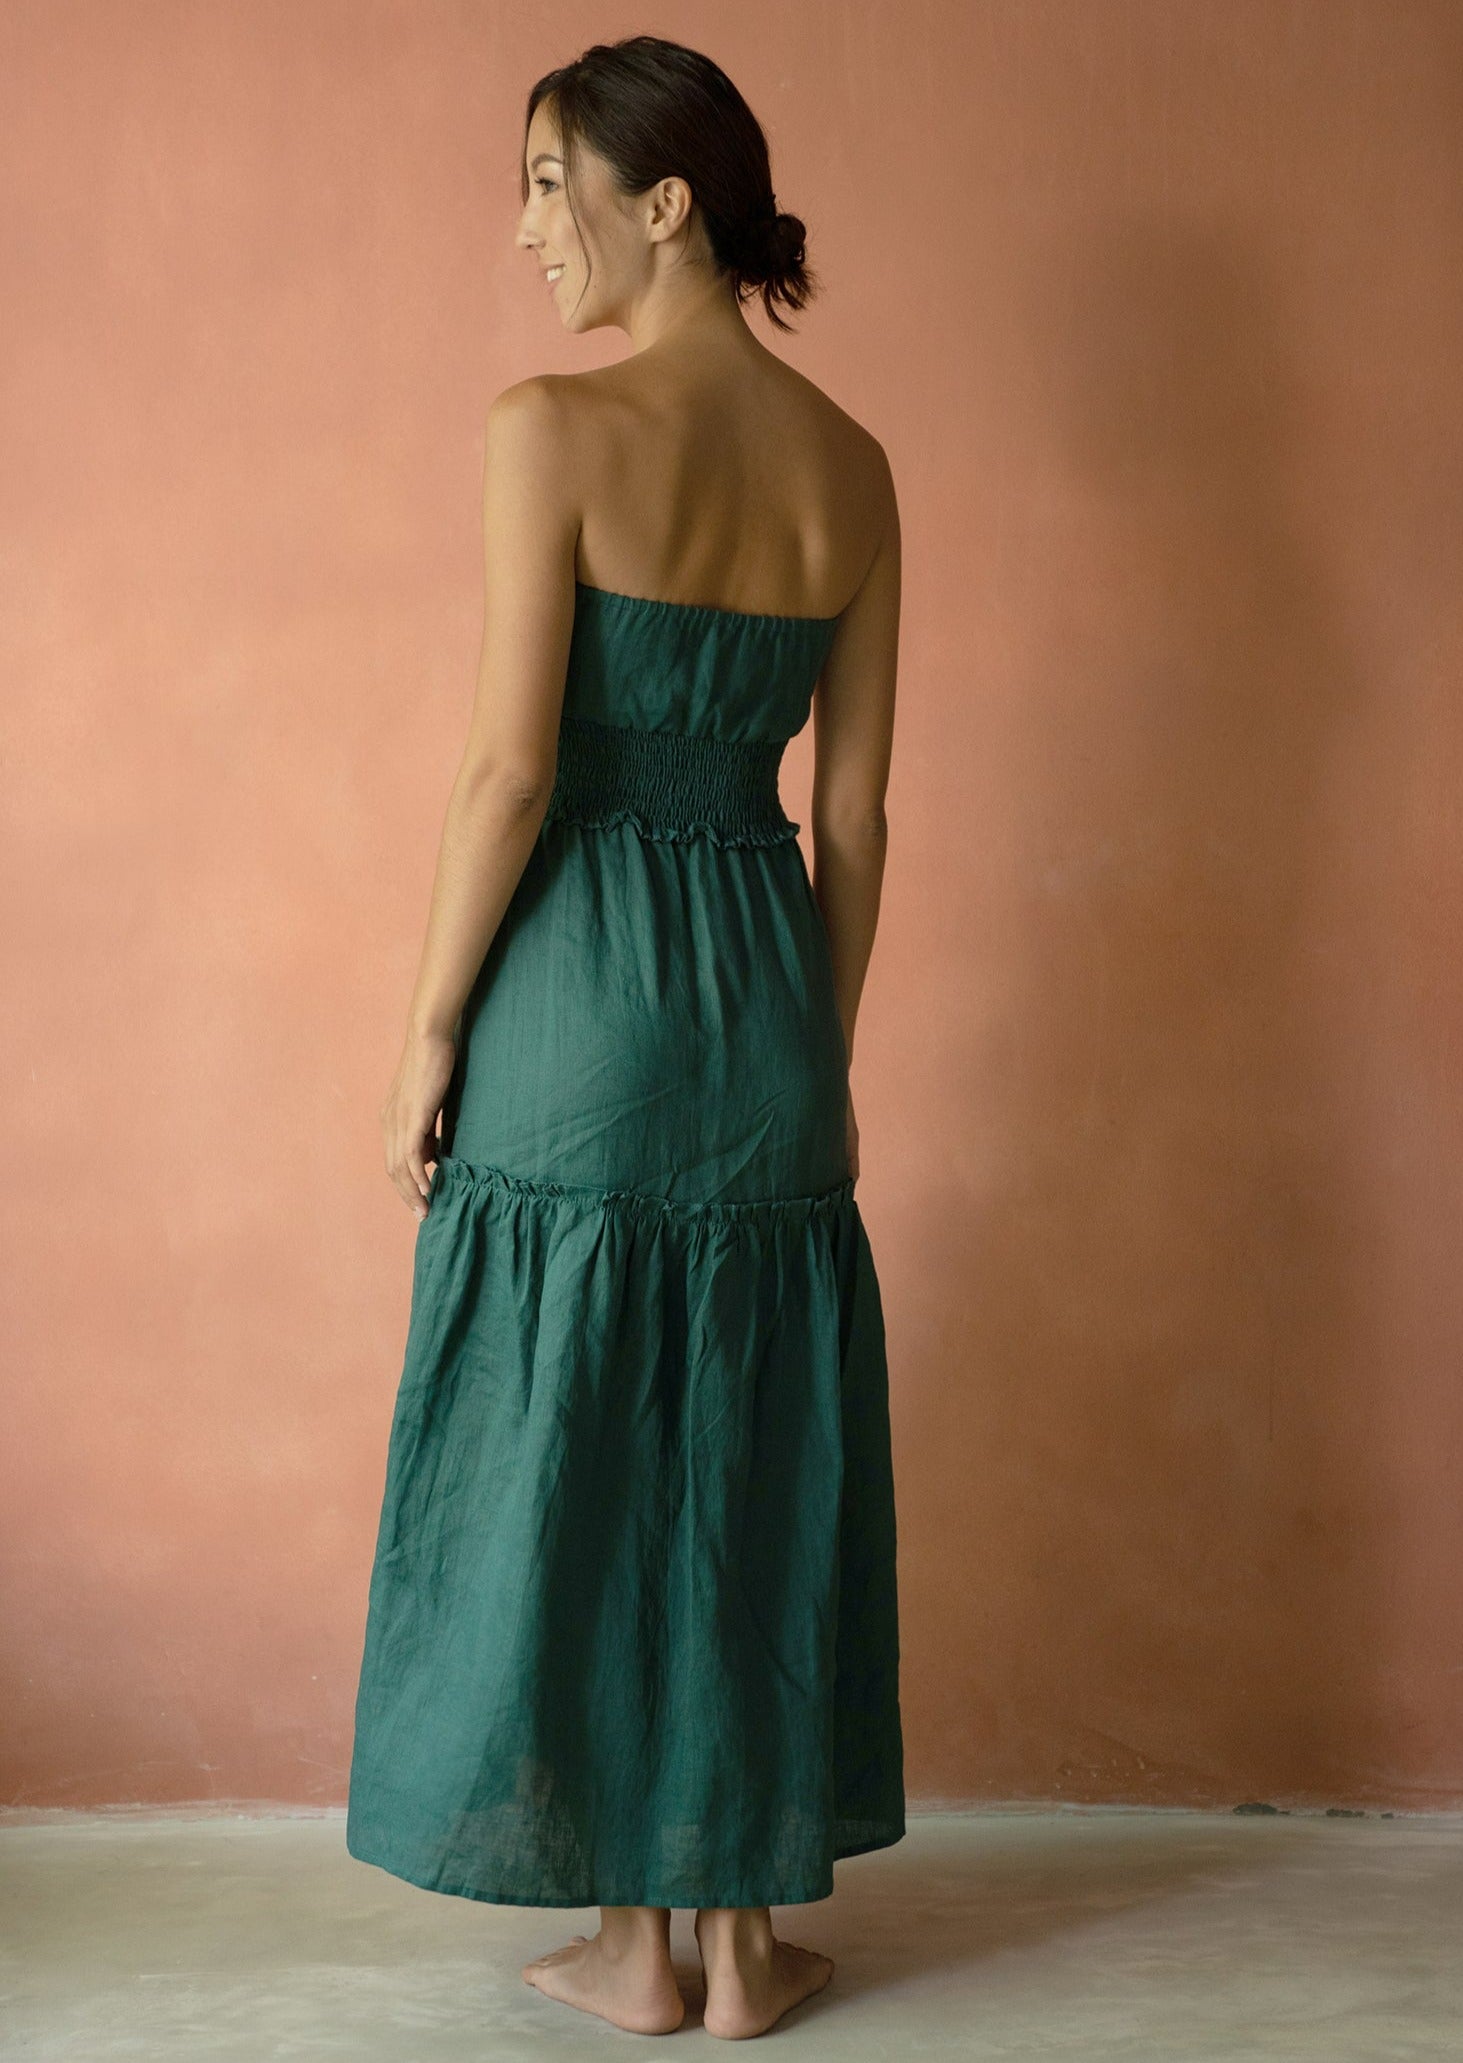 Sleeveless long dress green for staycation | Sustainable resort wear